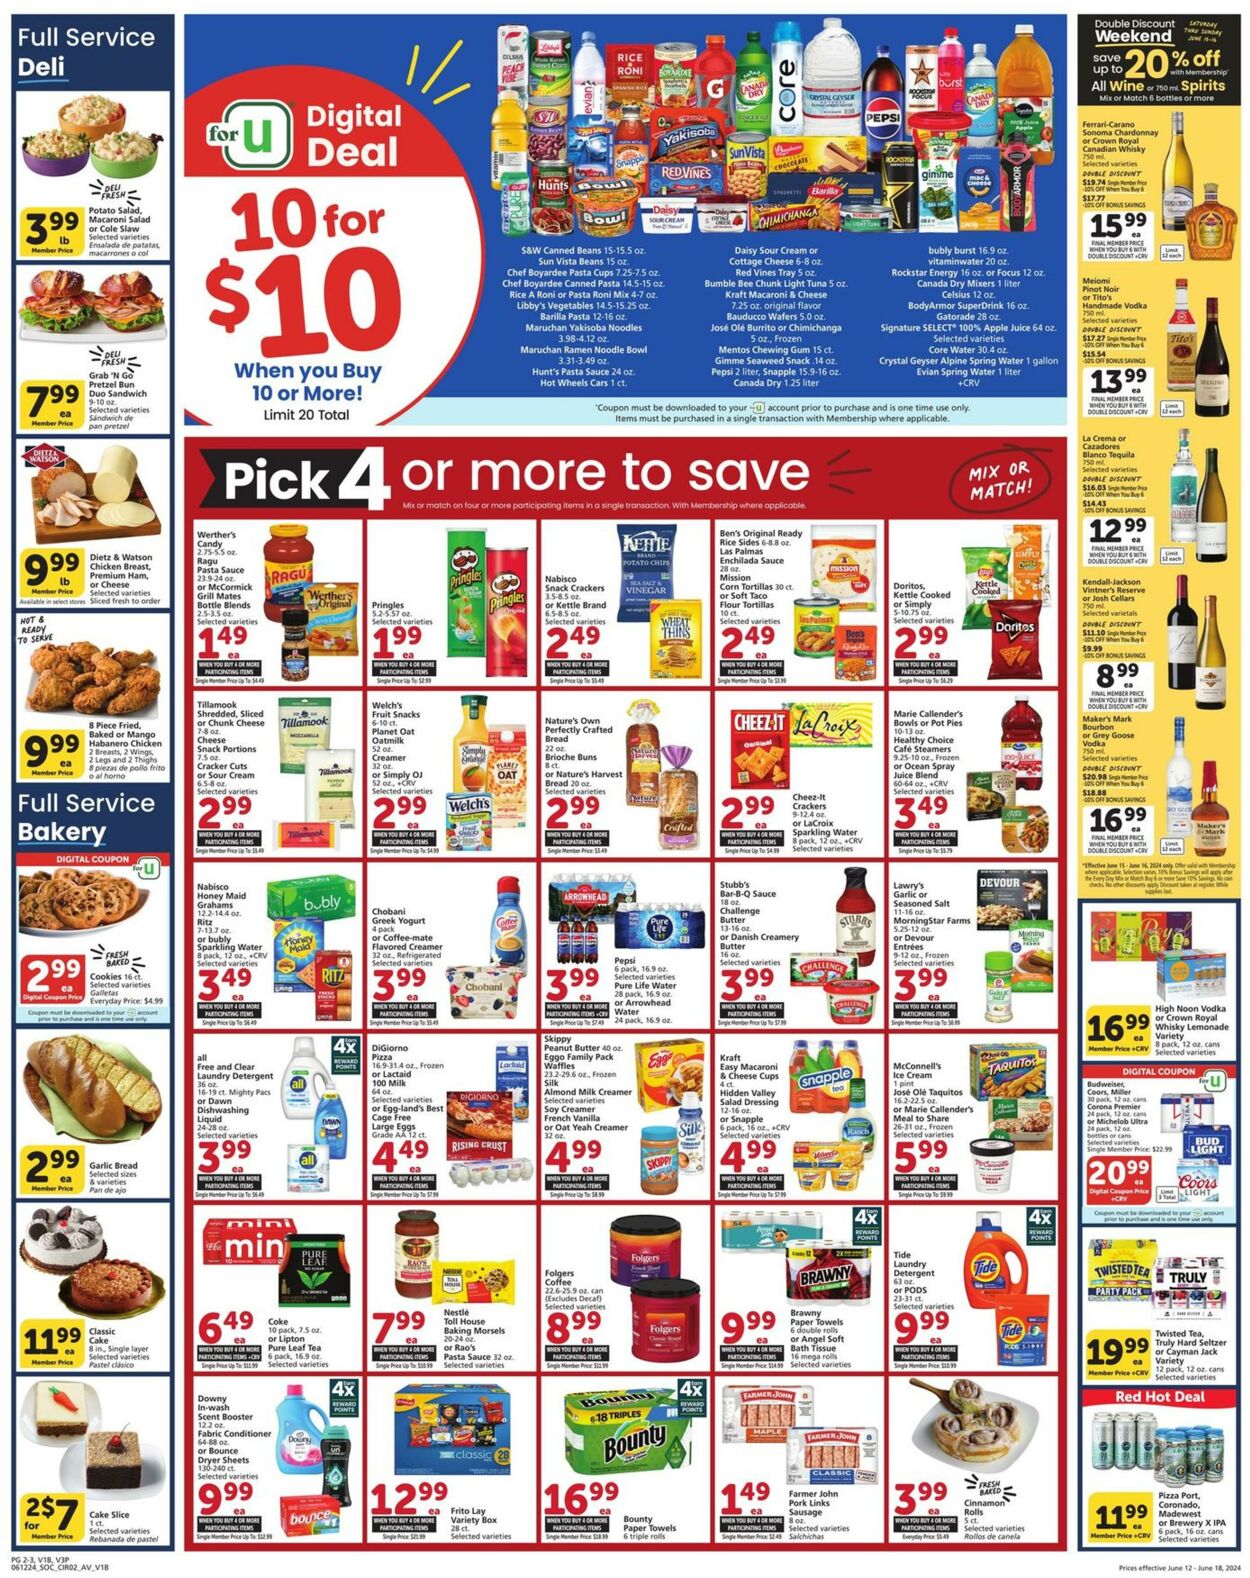 Weekly ad Vons 06/12/2024 - 06/18/2024